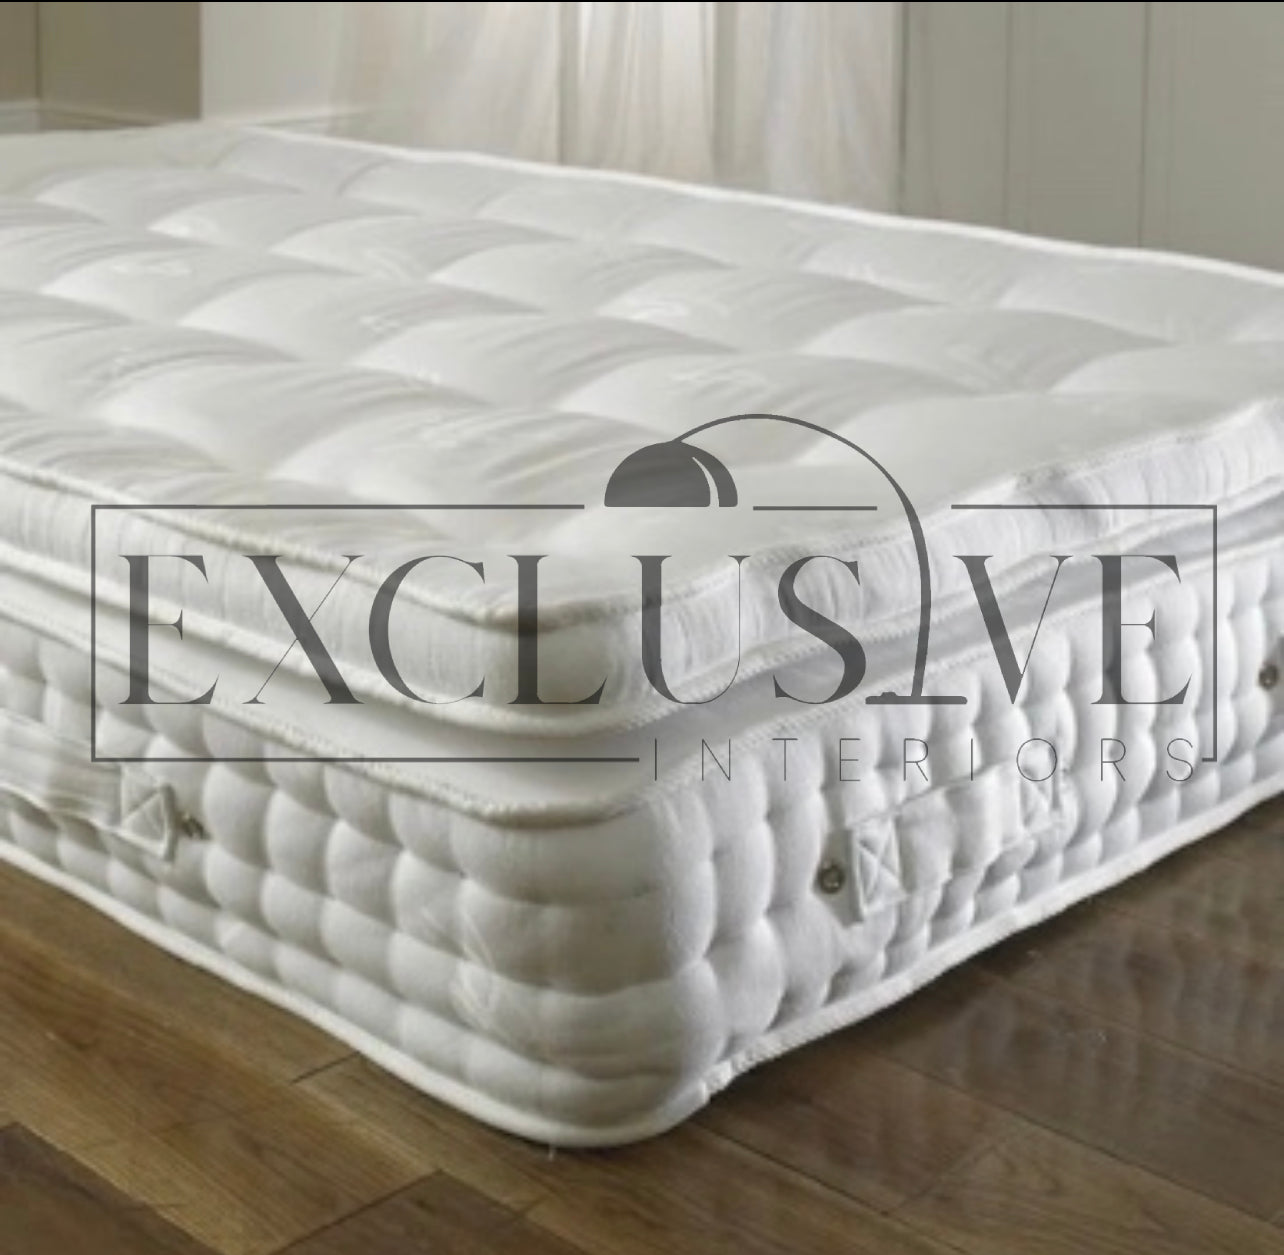 Pillow-Top Mattress using springs zones supporting areas like the hips medium firmness with pillowtop providing a relaxing softer top, best selling mattress